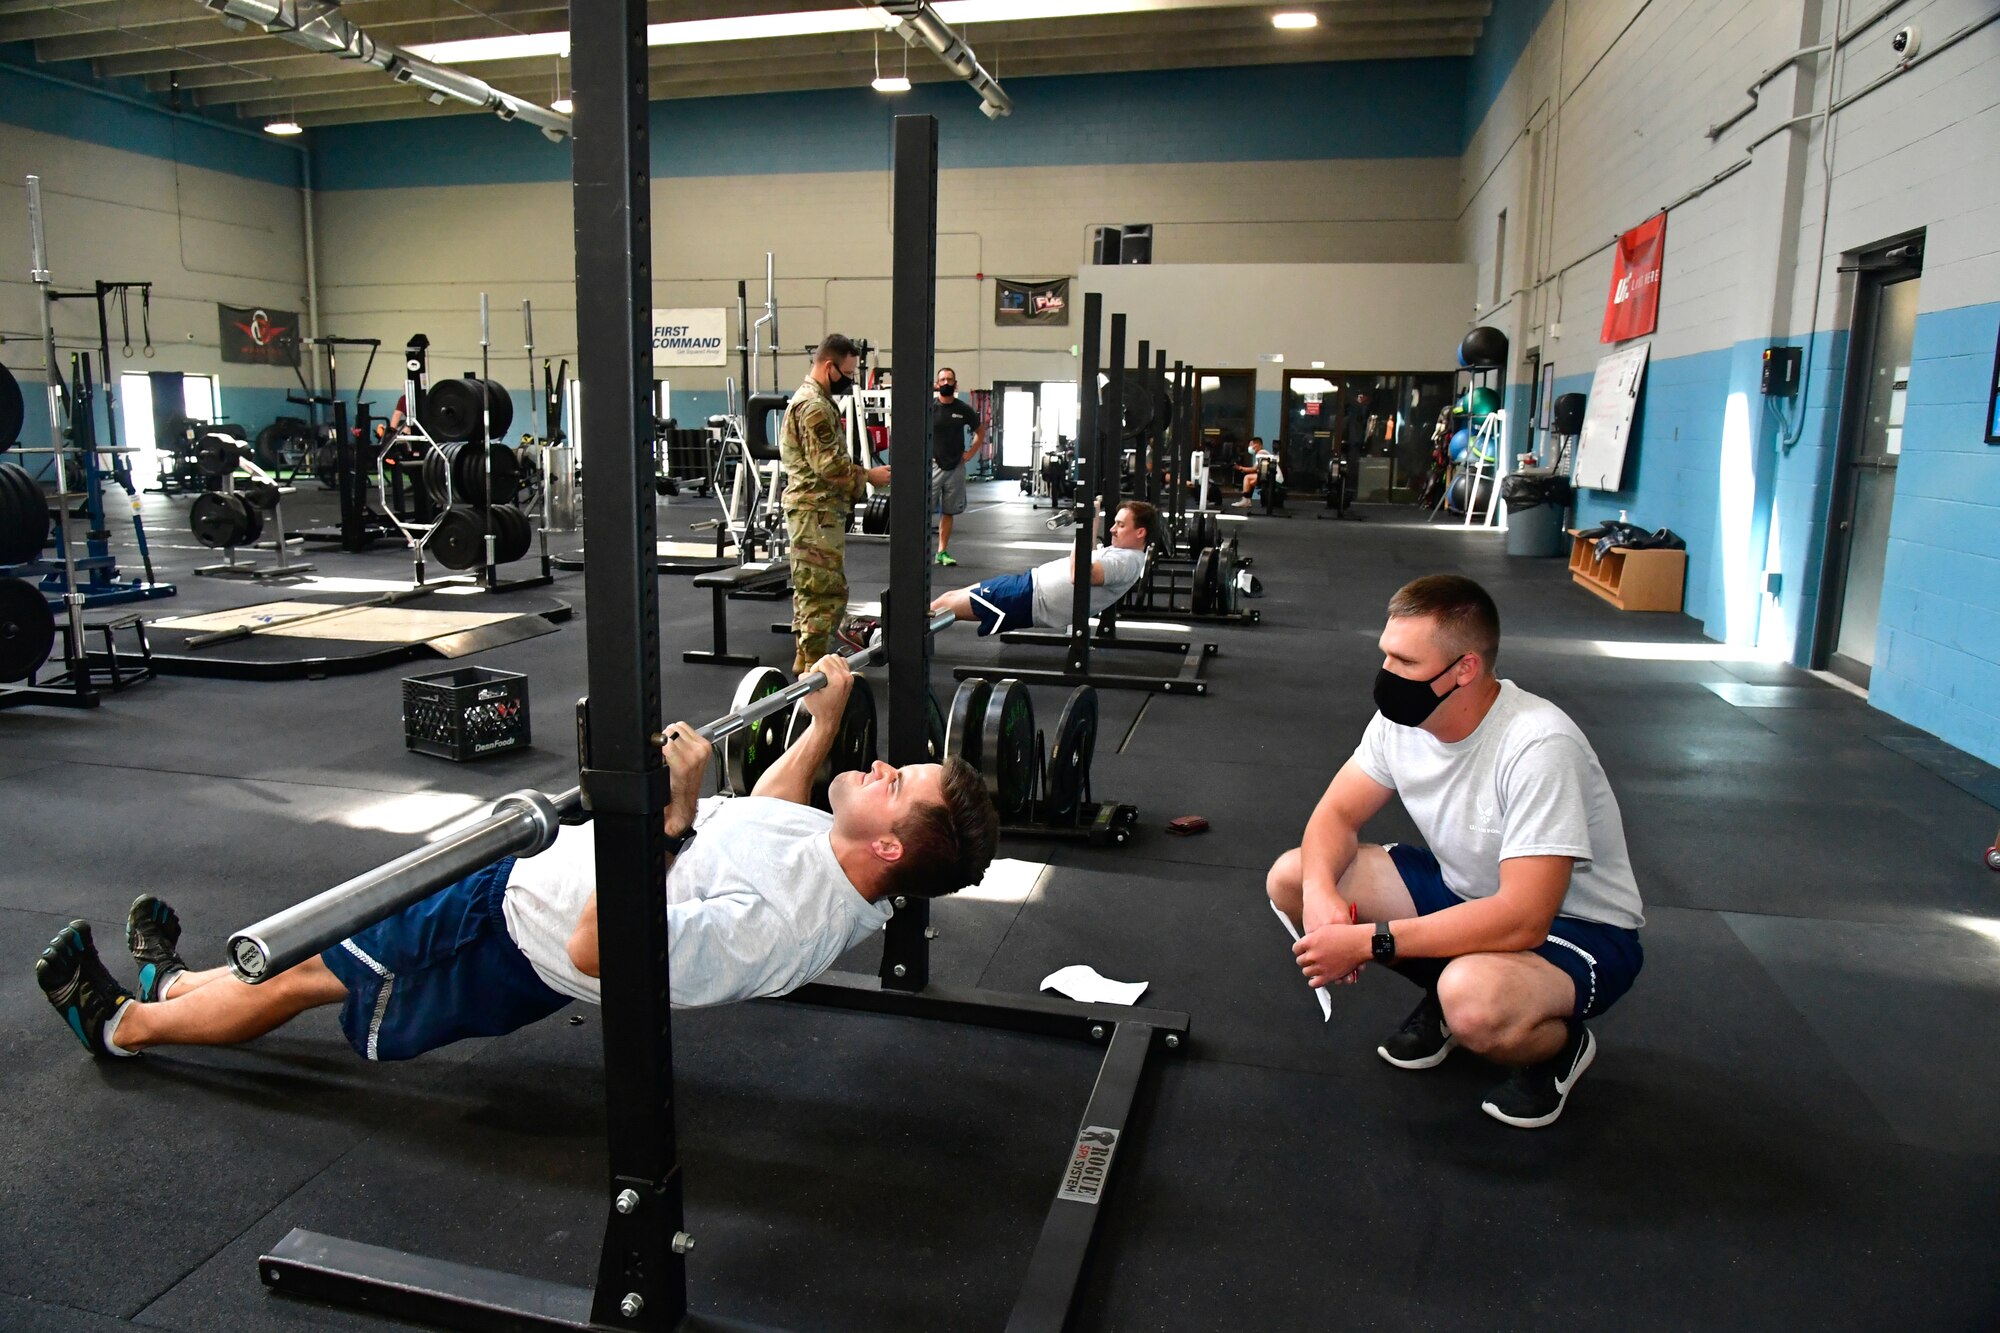 An Airman performs modified pull-ups while another Airman watches.